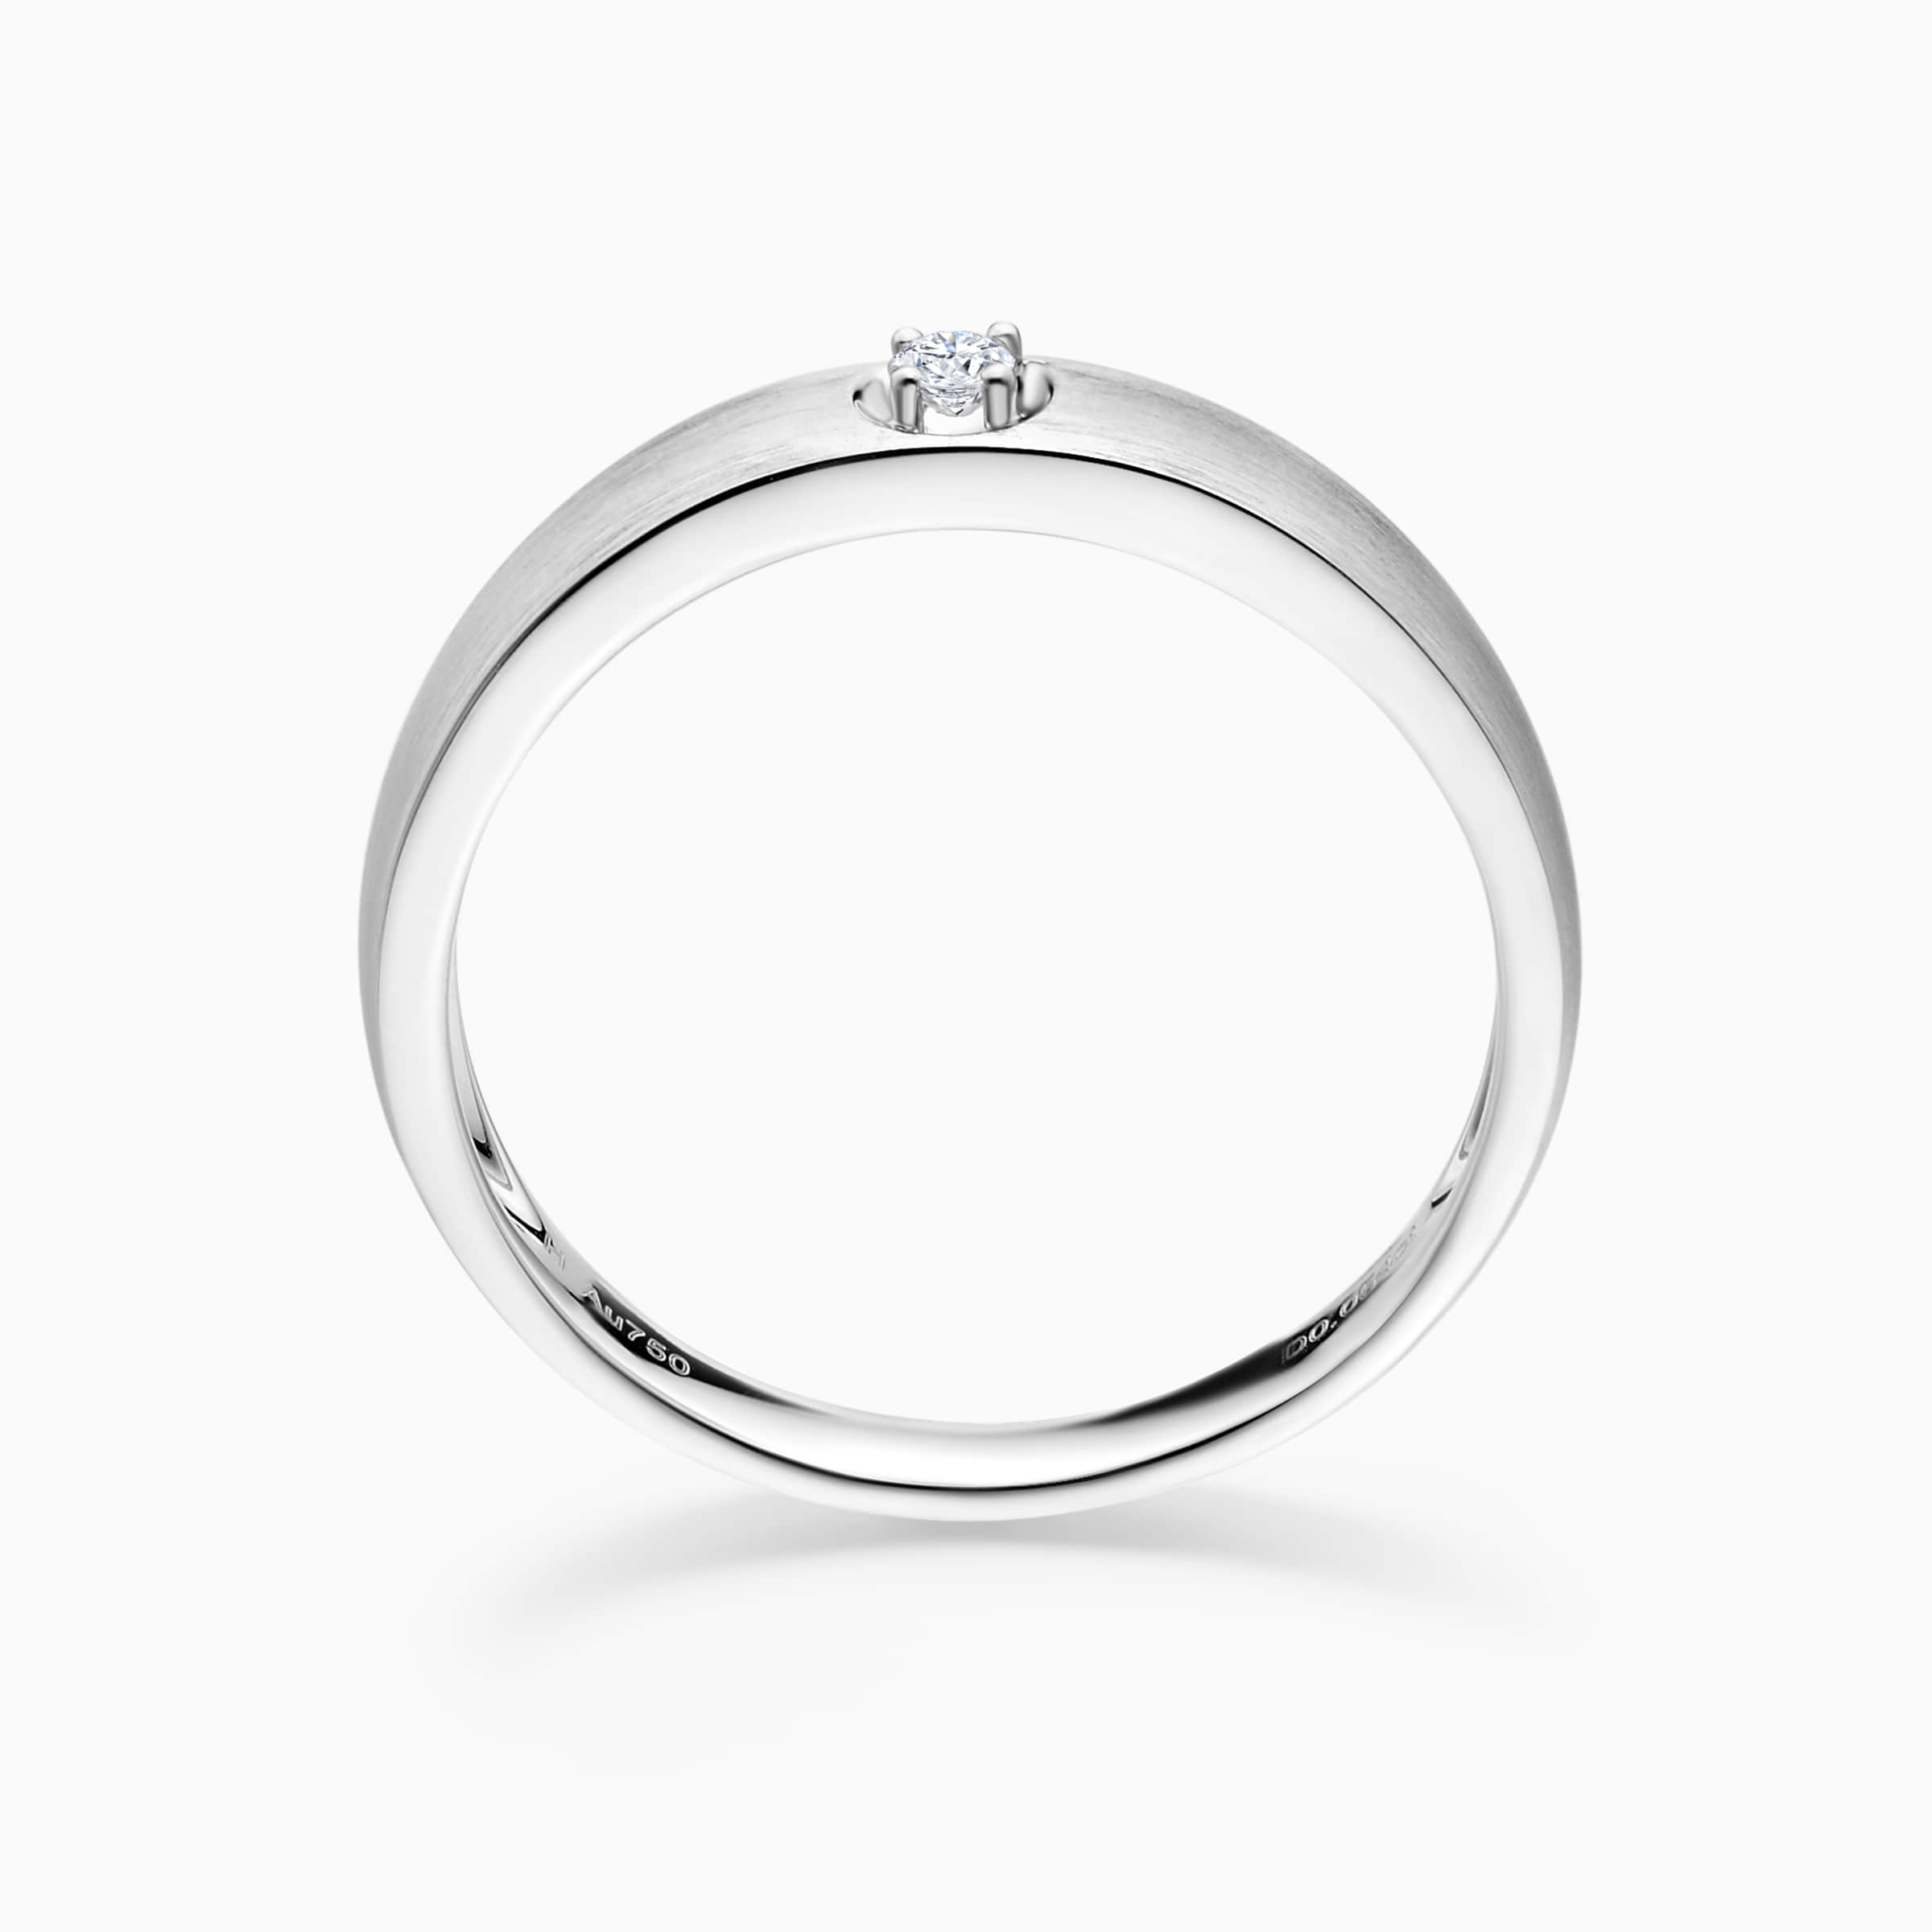 Darry Ring cool wedding ring for man front view